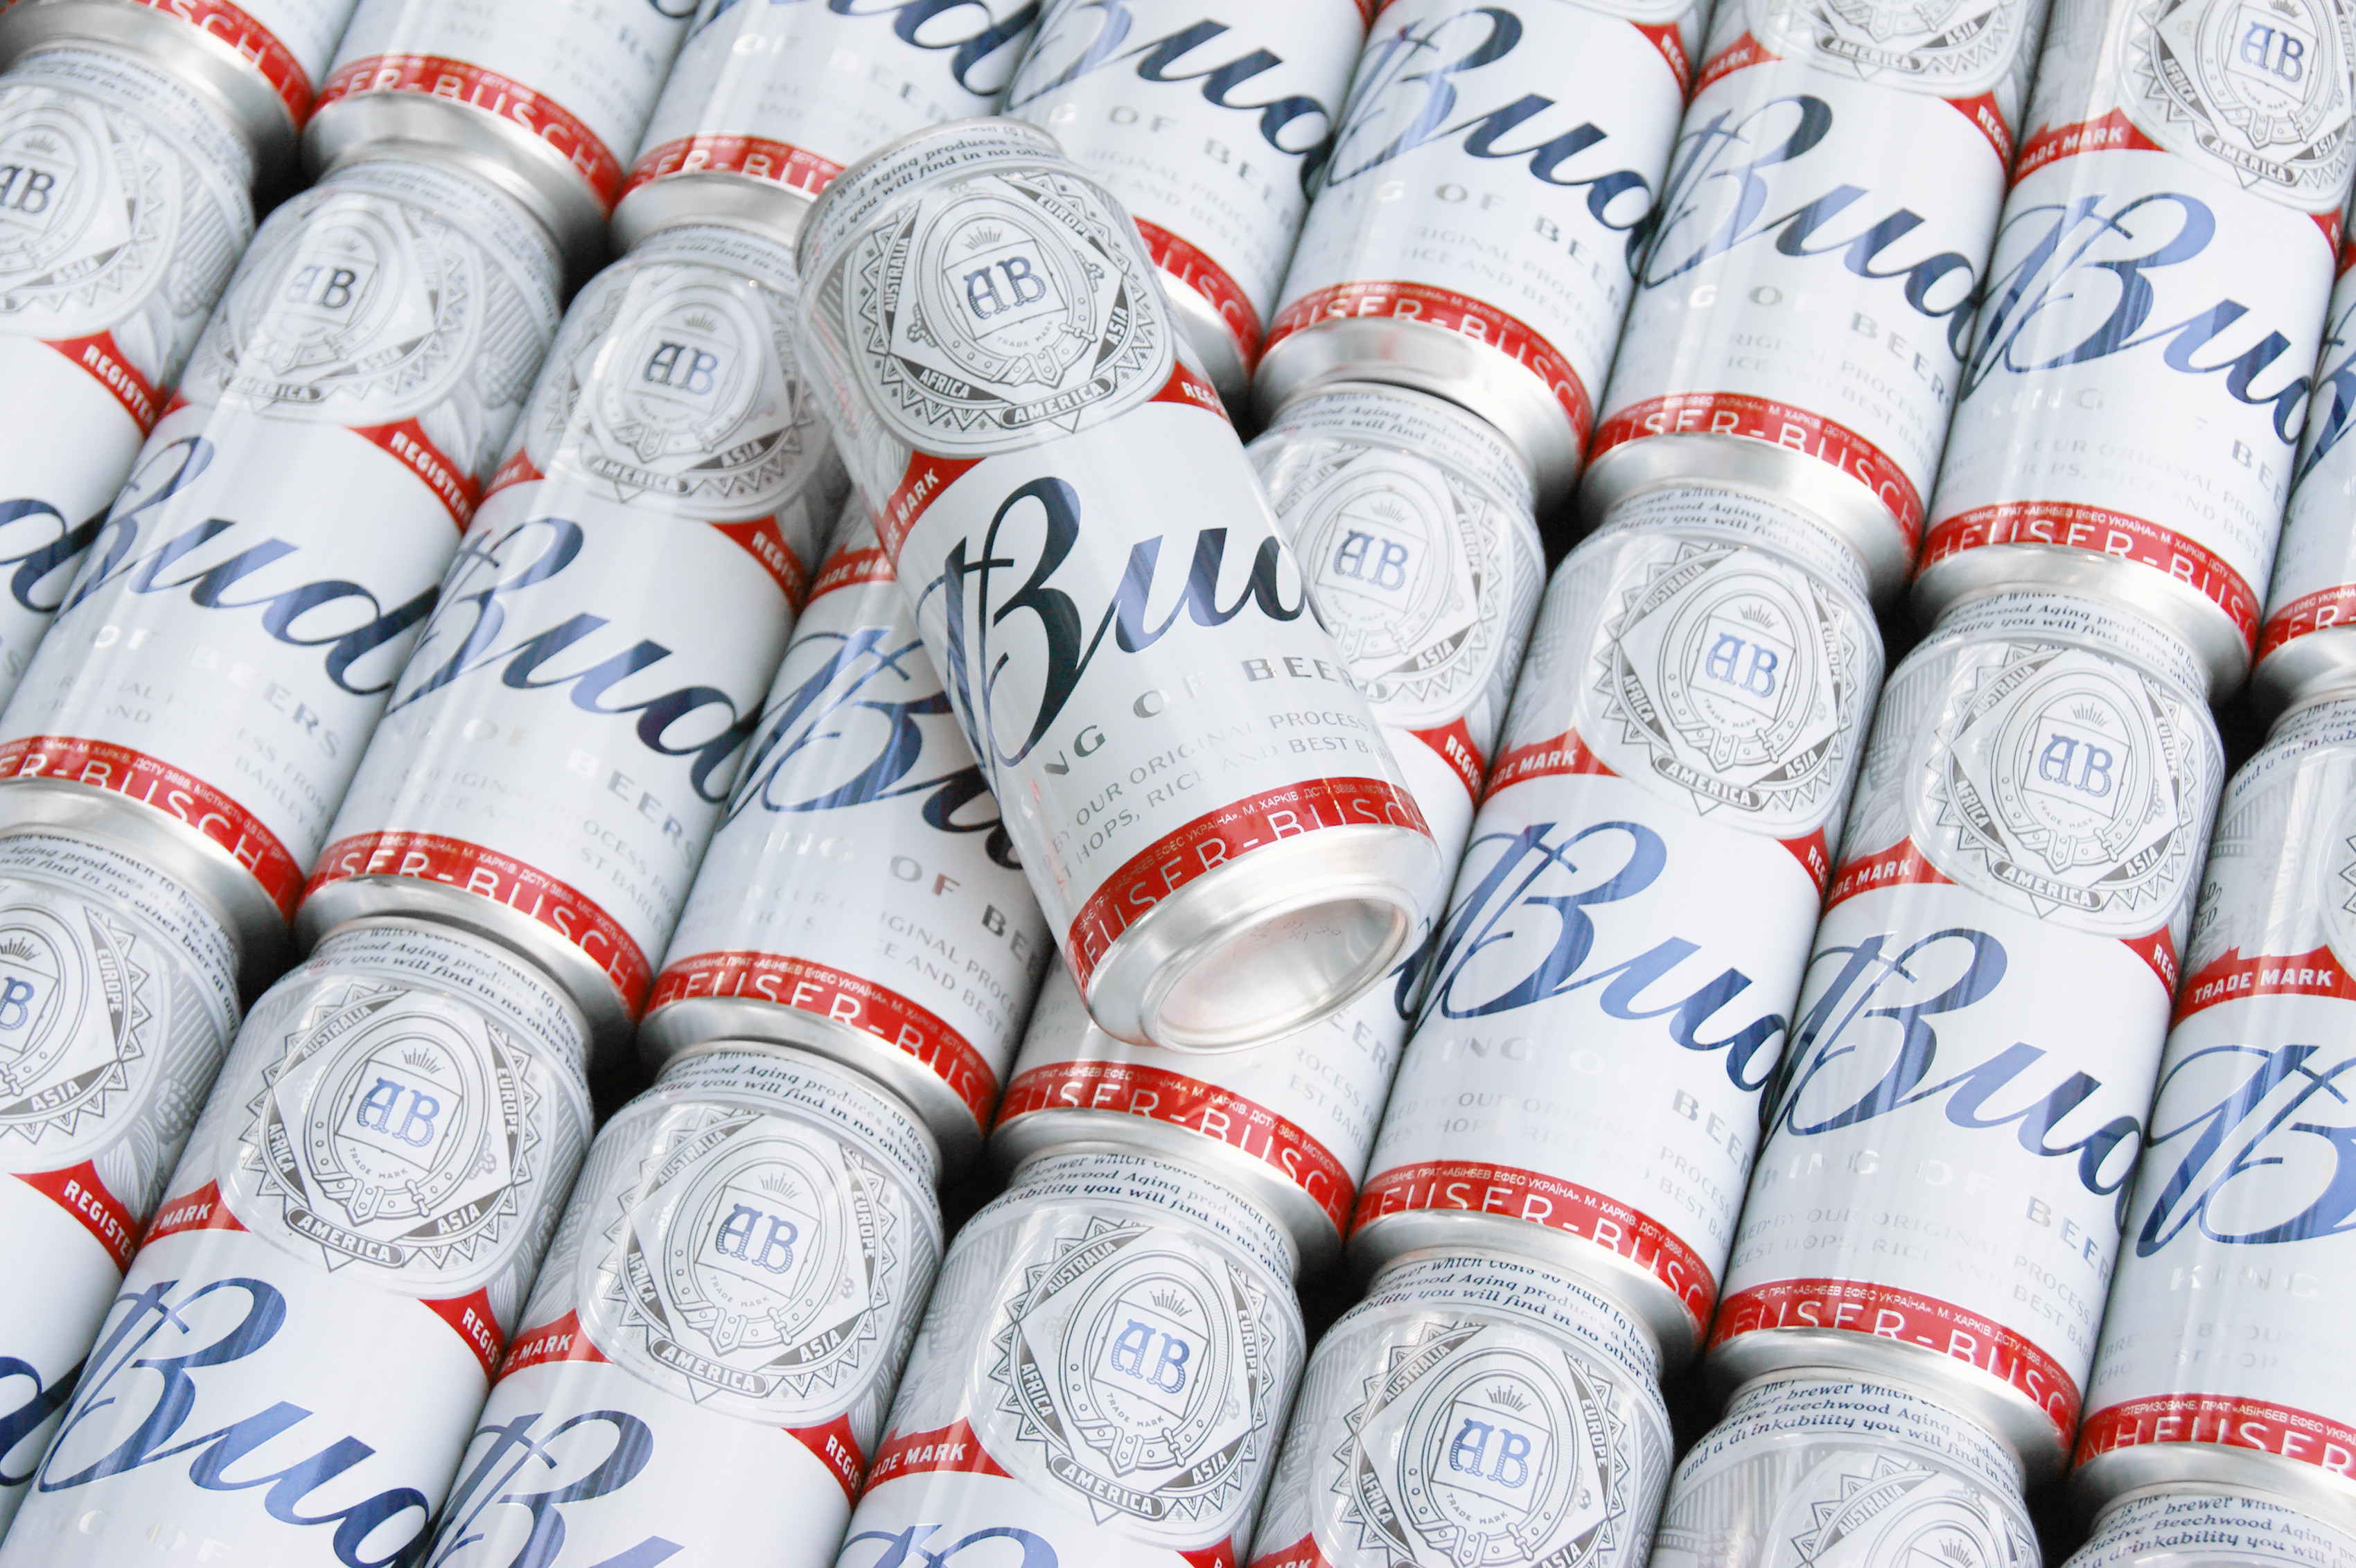 Anheuser-Busch Invests $6 Million in its Cisco Brewery in Portsmouth